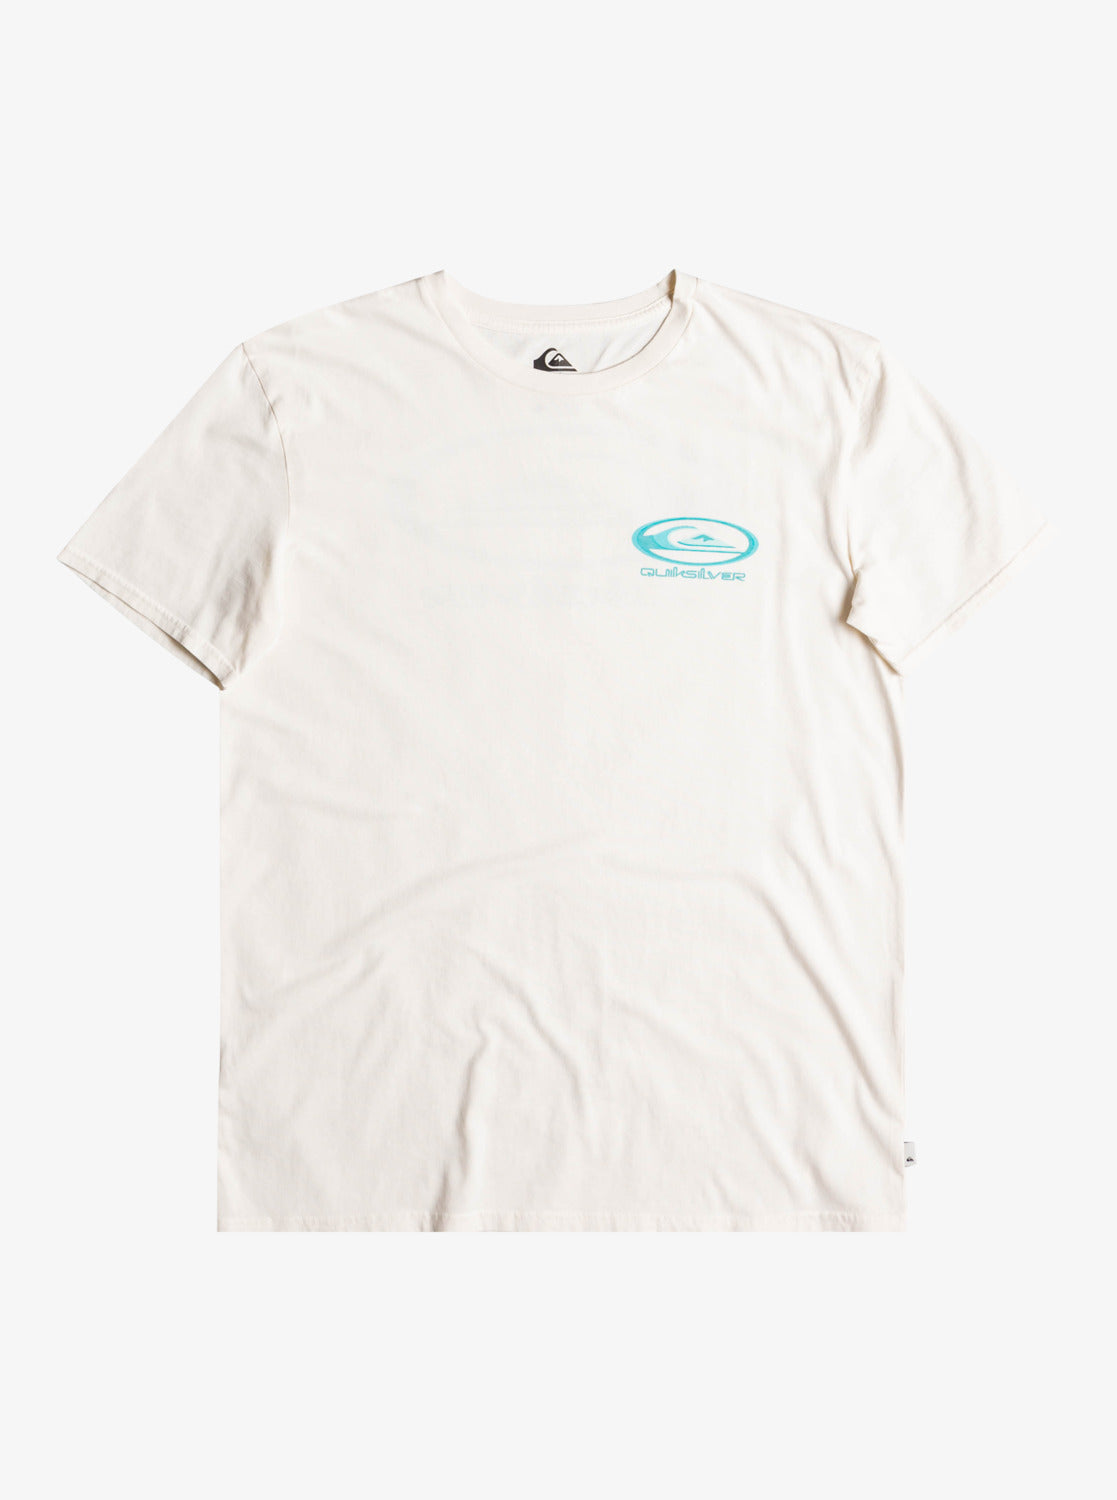 Quiksilver Strictly Roots Organic T-Shirt - 100% Cotton